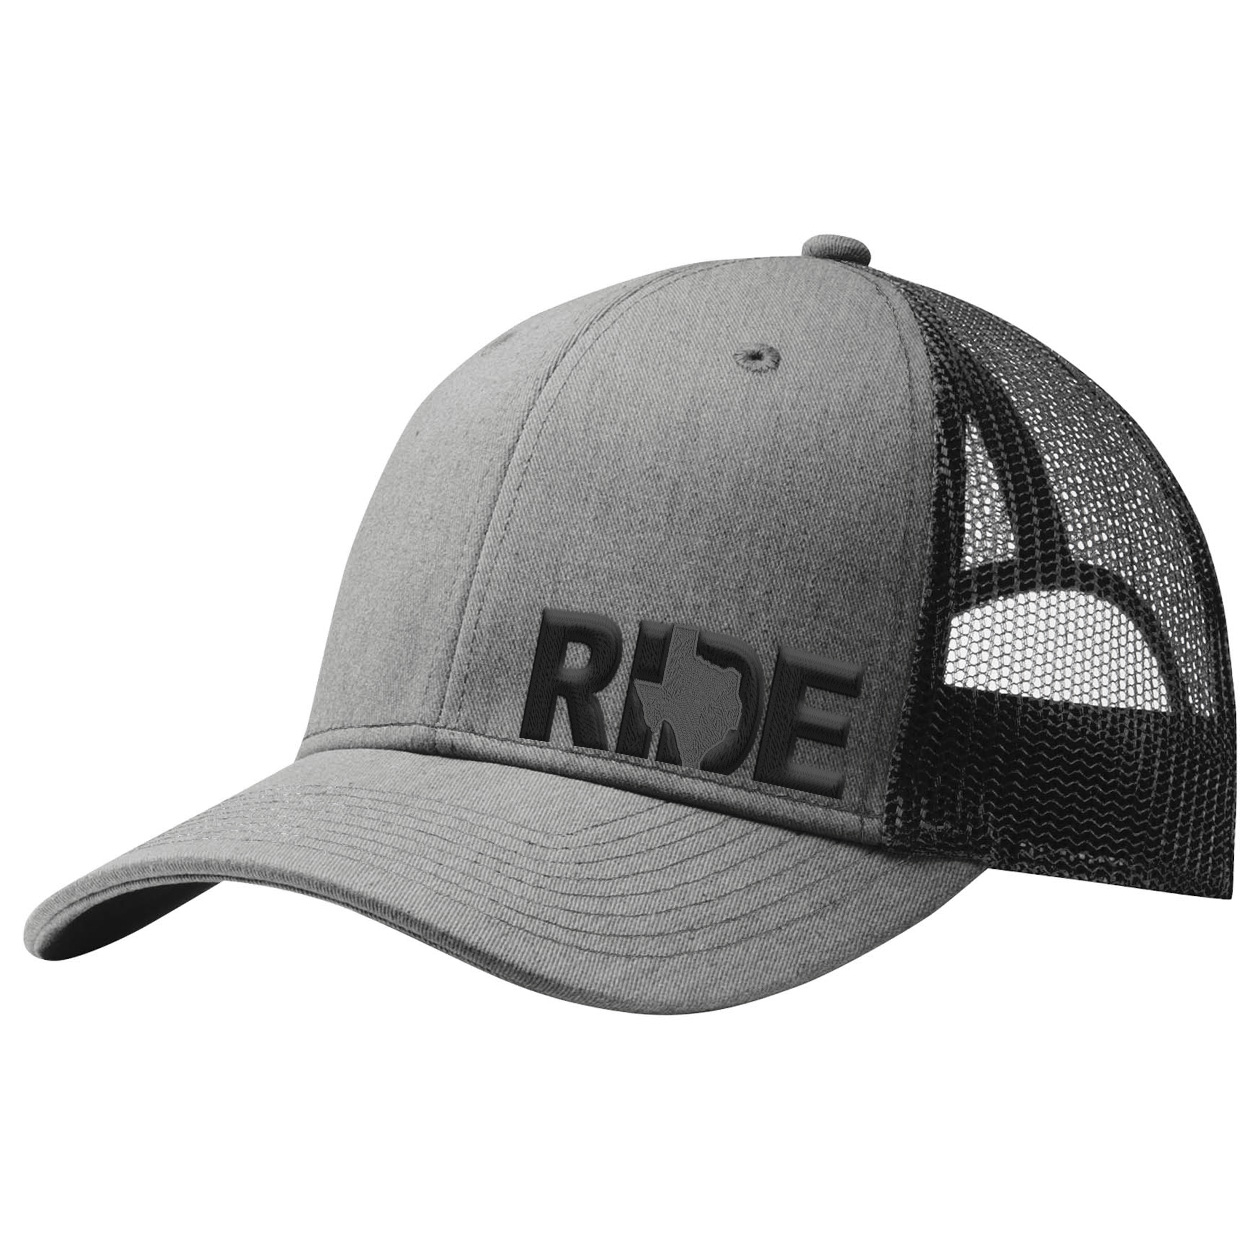 Ride Texas Night Out Pro Embroidered Snapback Trucker Hat Heather Gray/Black